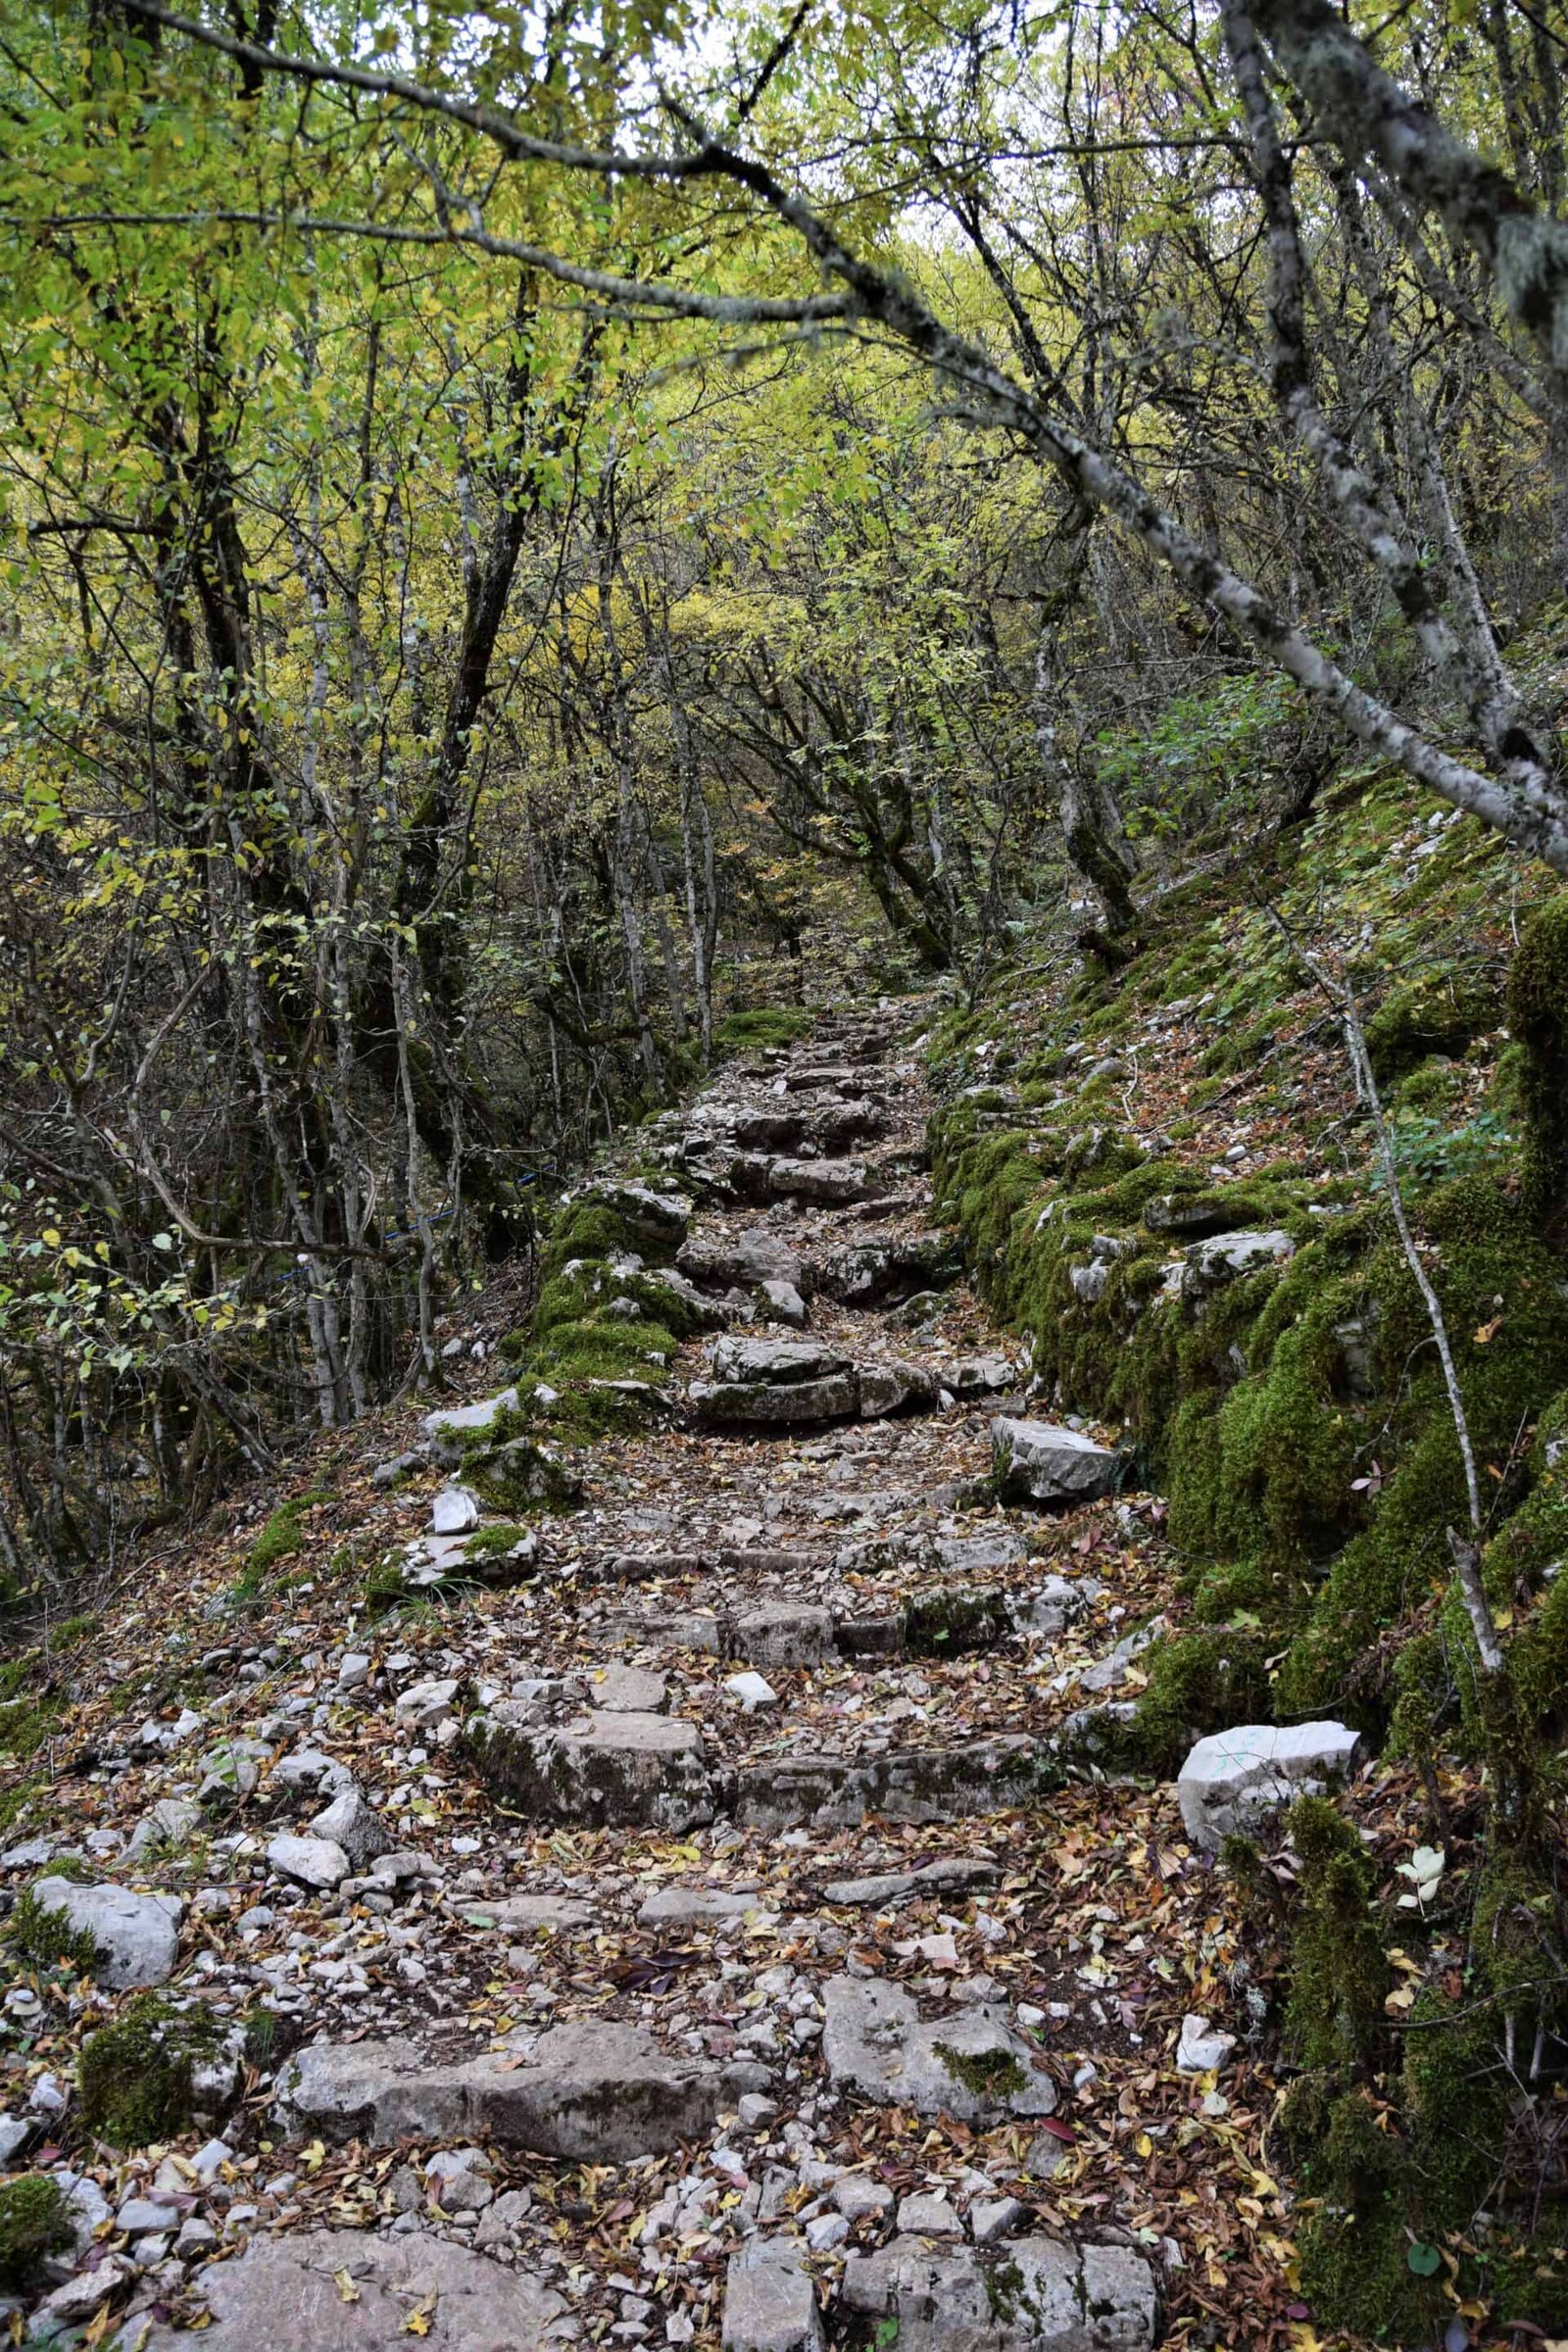 ancient stone steps covered in fallen leaves lead through an autumnal forest